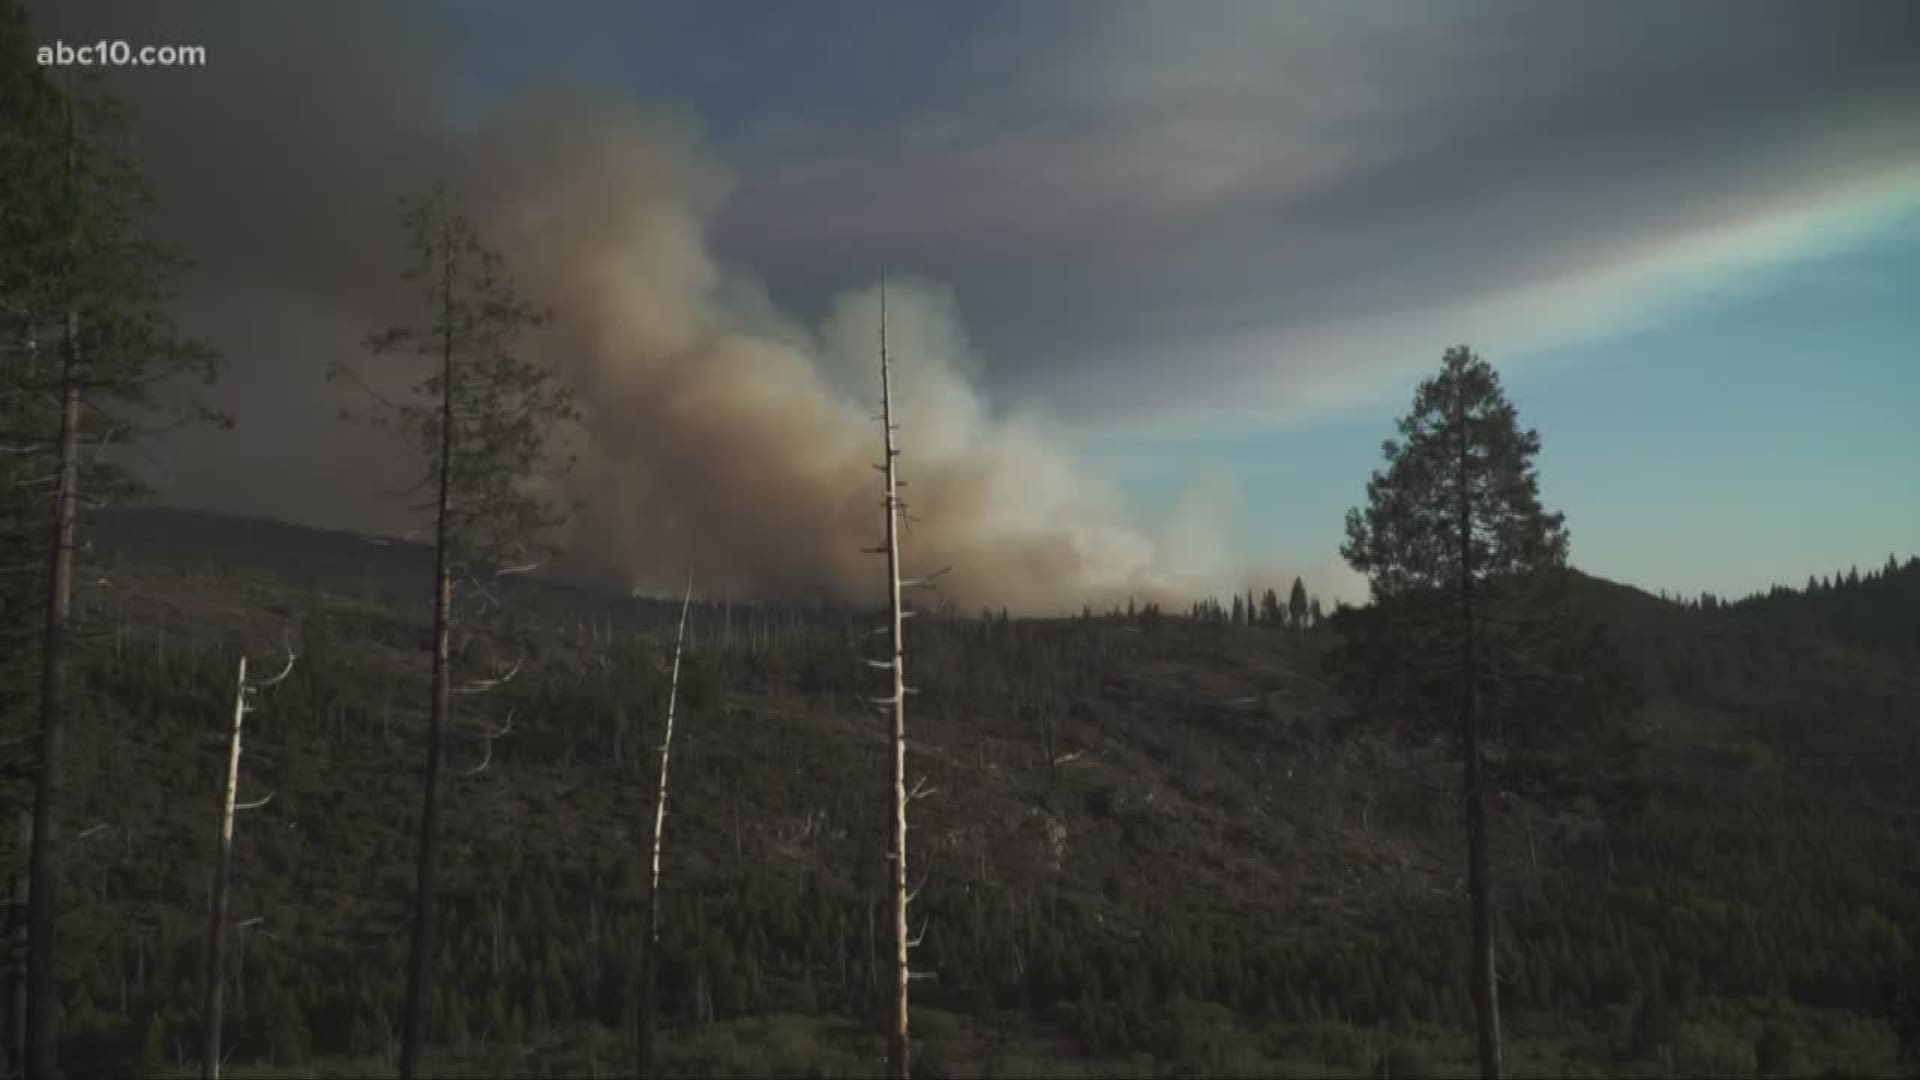 In Placer County, the North Fire caused quite a mess for people ending their Labor Day camping trips. Several campgrounds evacuated, traffic backed up, not what you expect for a holiday weekend.